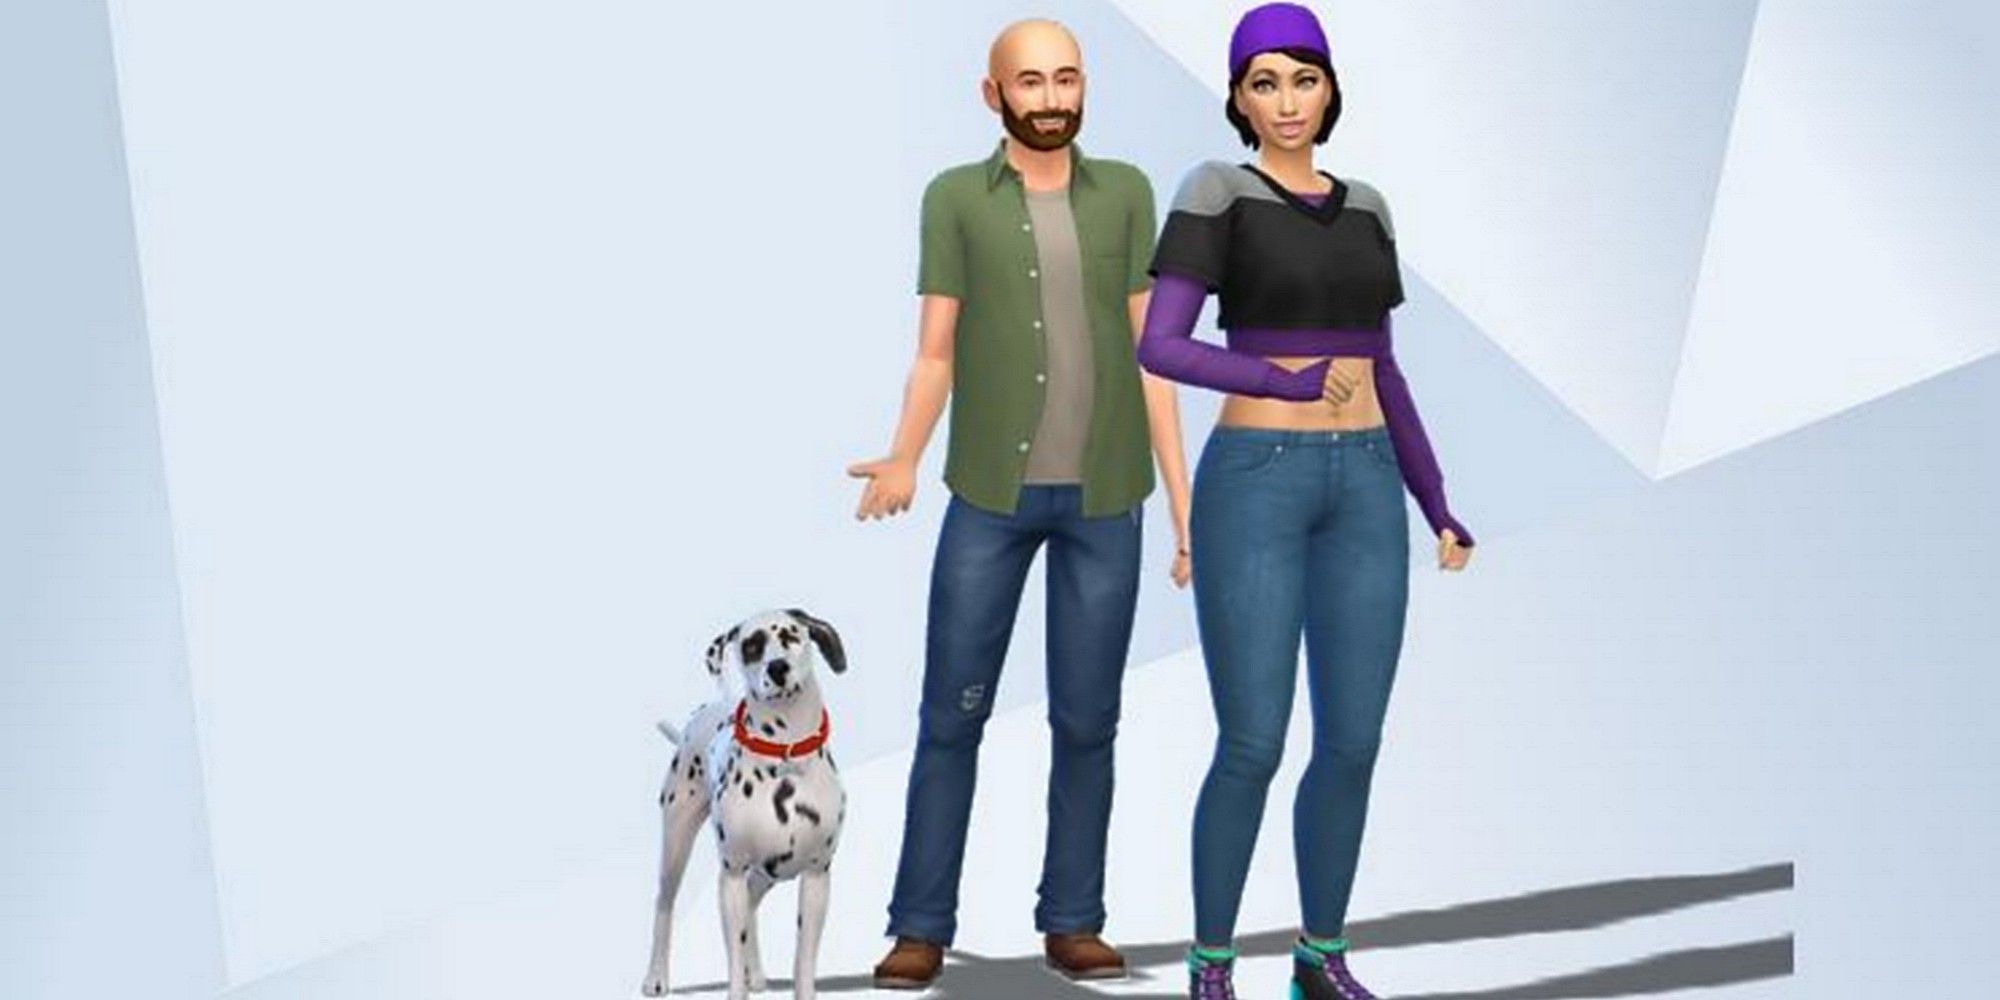 Multi Gallery Pose Set - The Sims 4 Mods - CurseForge